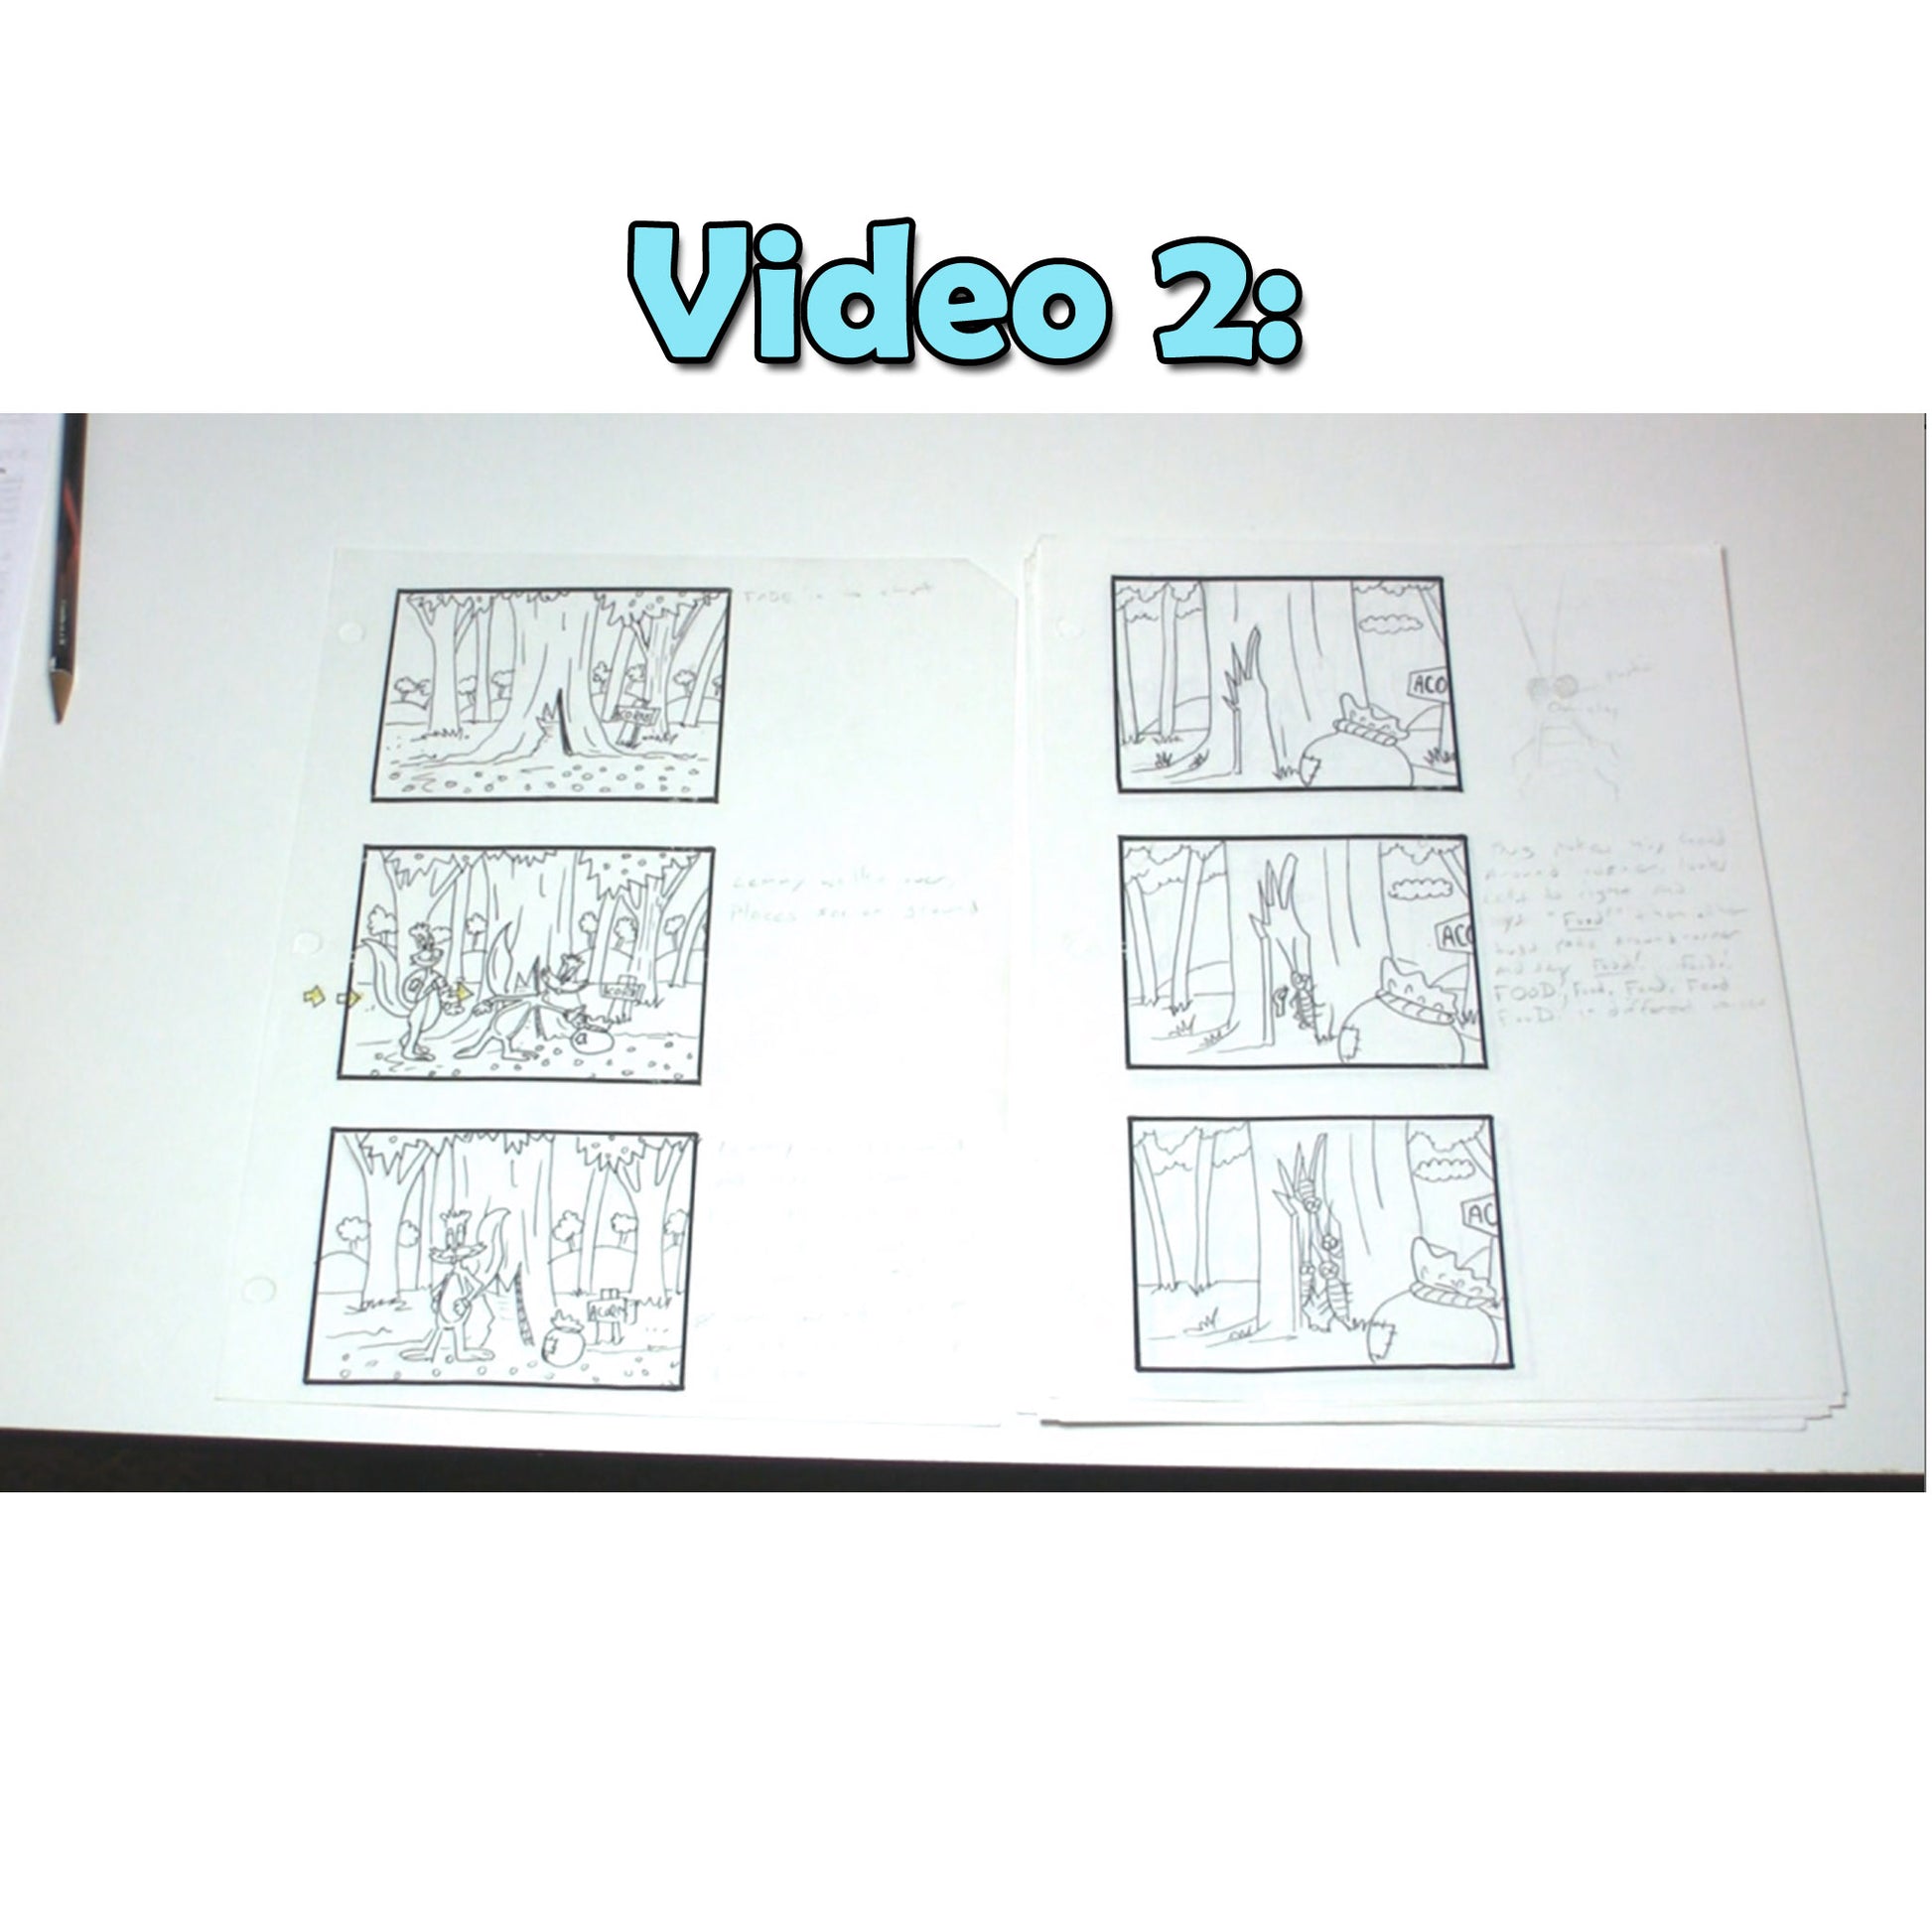 Video 2 with storyboard examples from a film called Bed Bugs